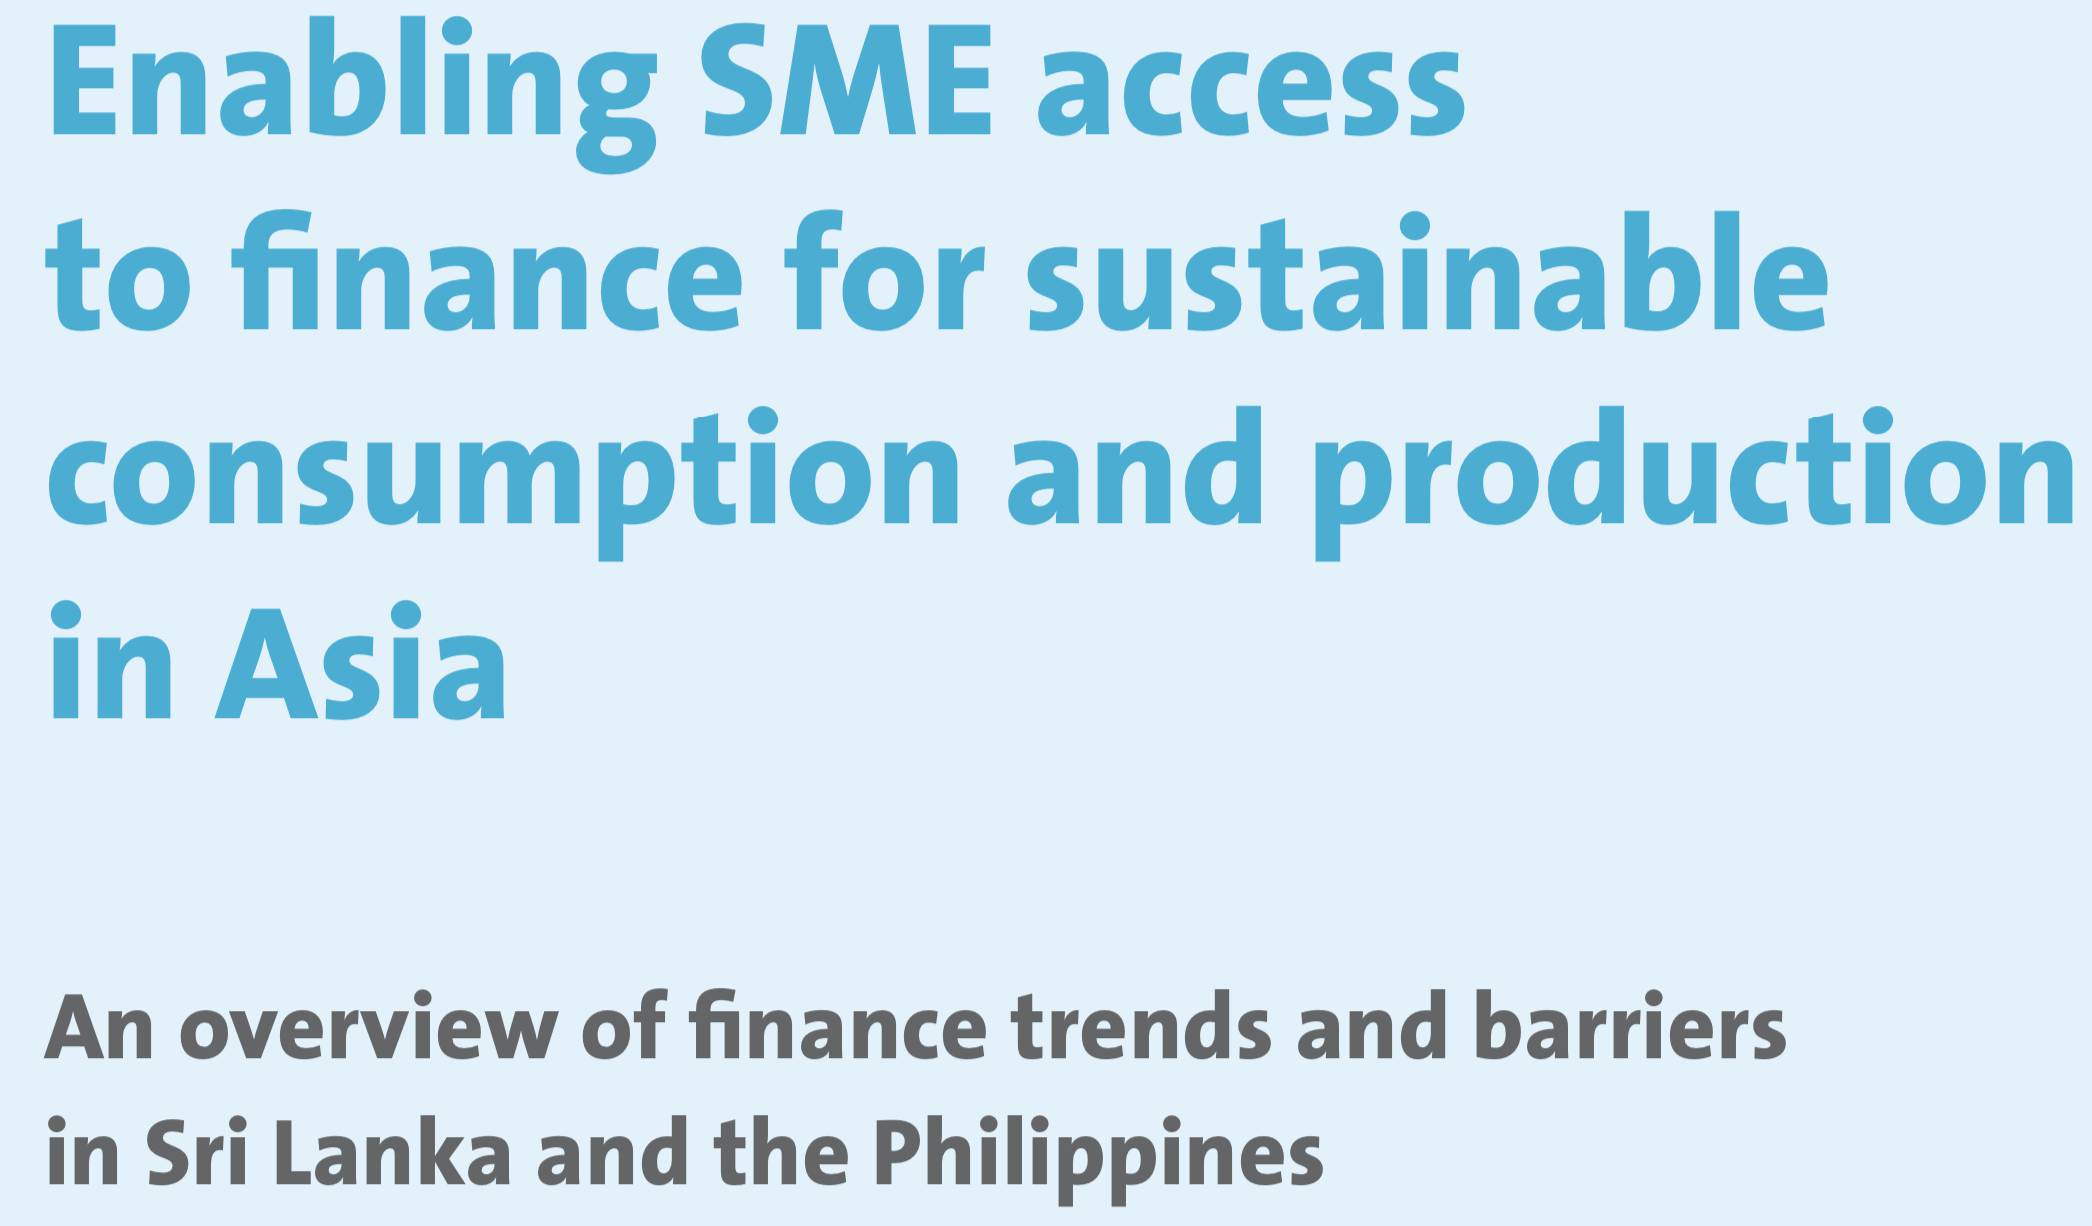 Enabling SME access to finance for sustainable consumption and production in Asia: An overview of finance trends and barriers in Sri Lanka and the Philippines